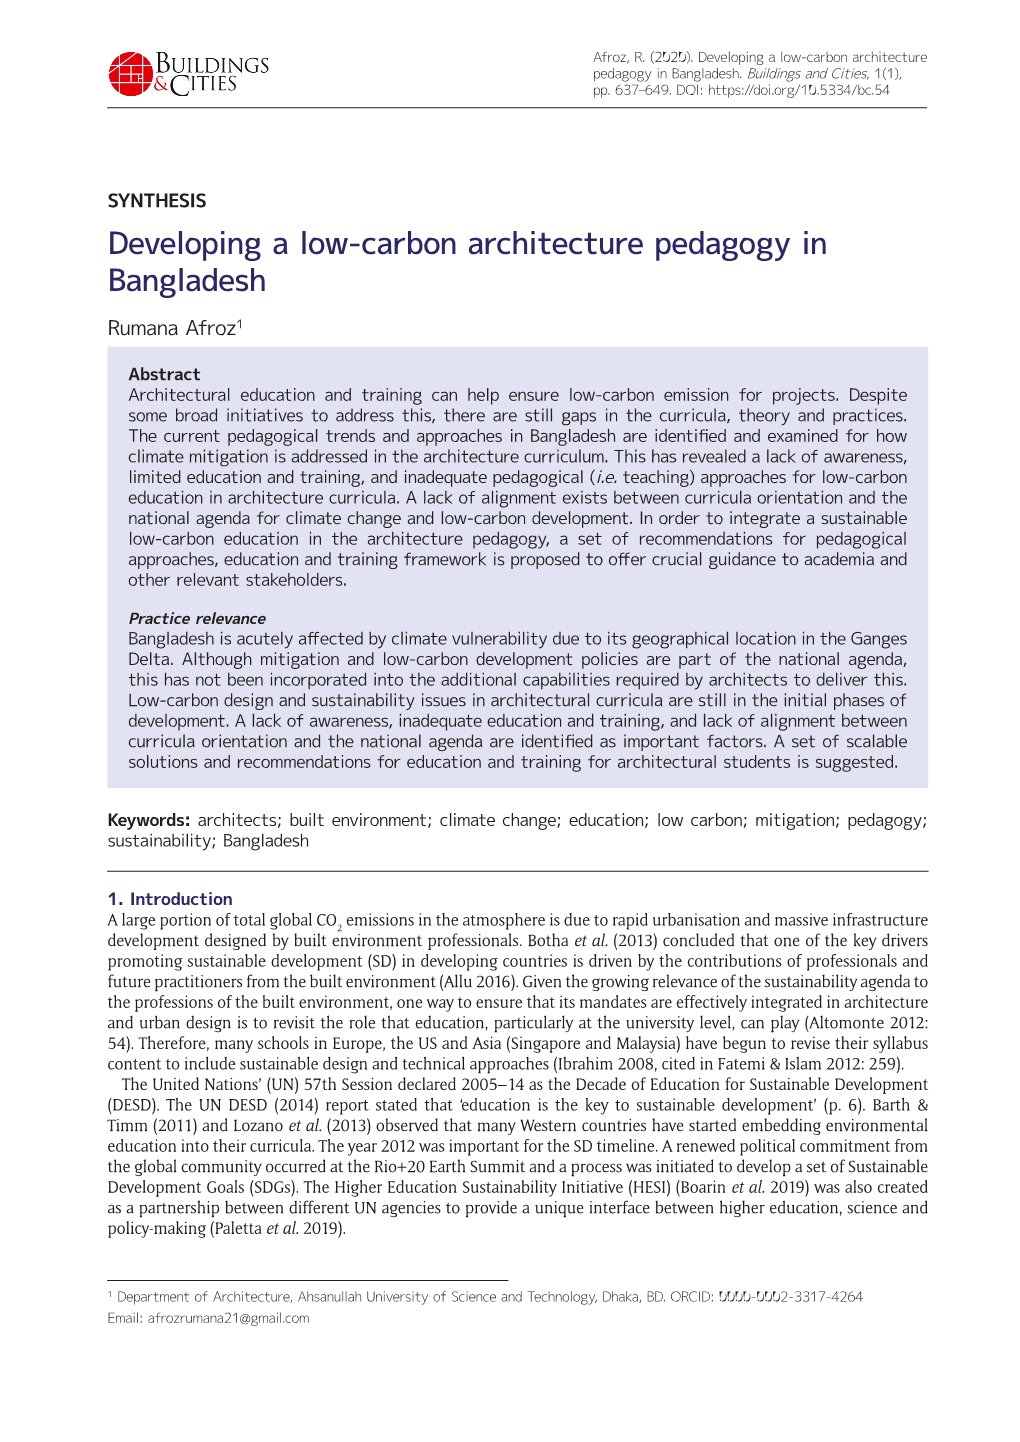 Developing a Low-Carbon Architecture Pedagogy in Bangladesh